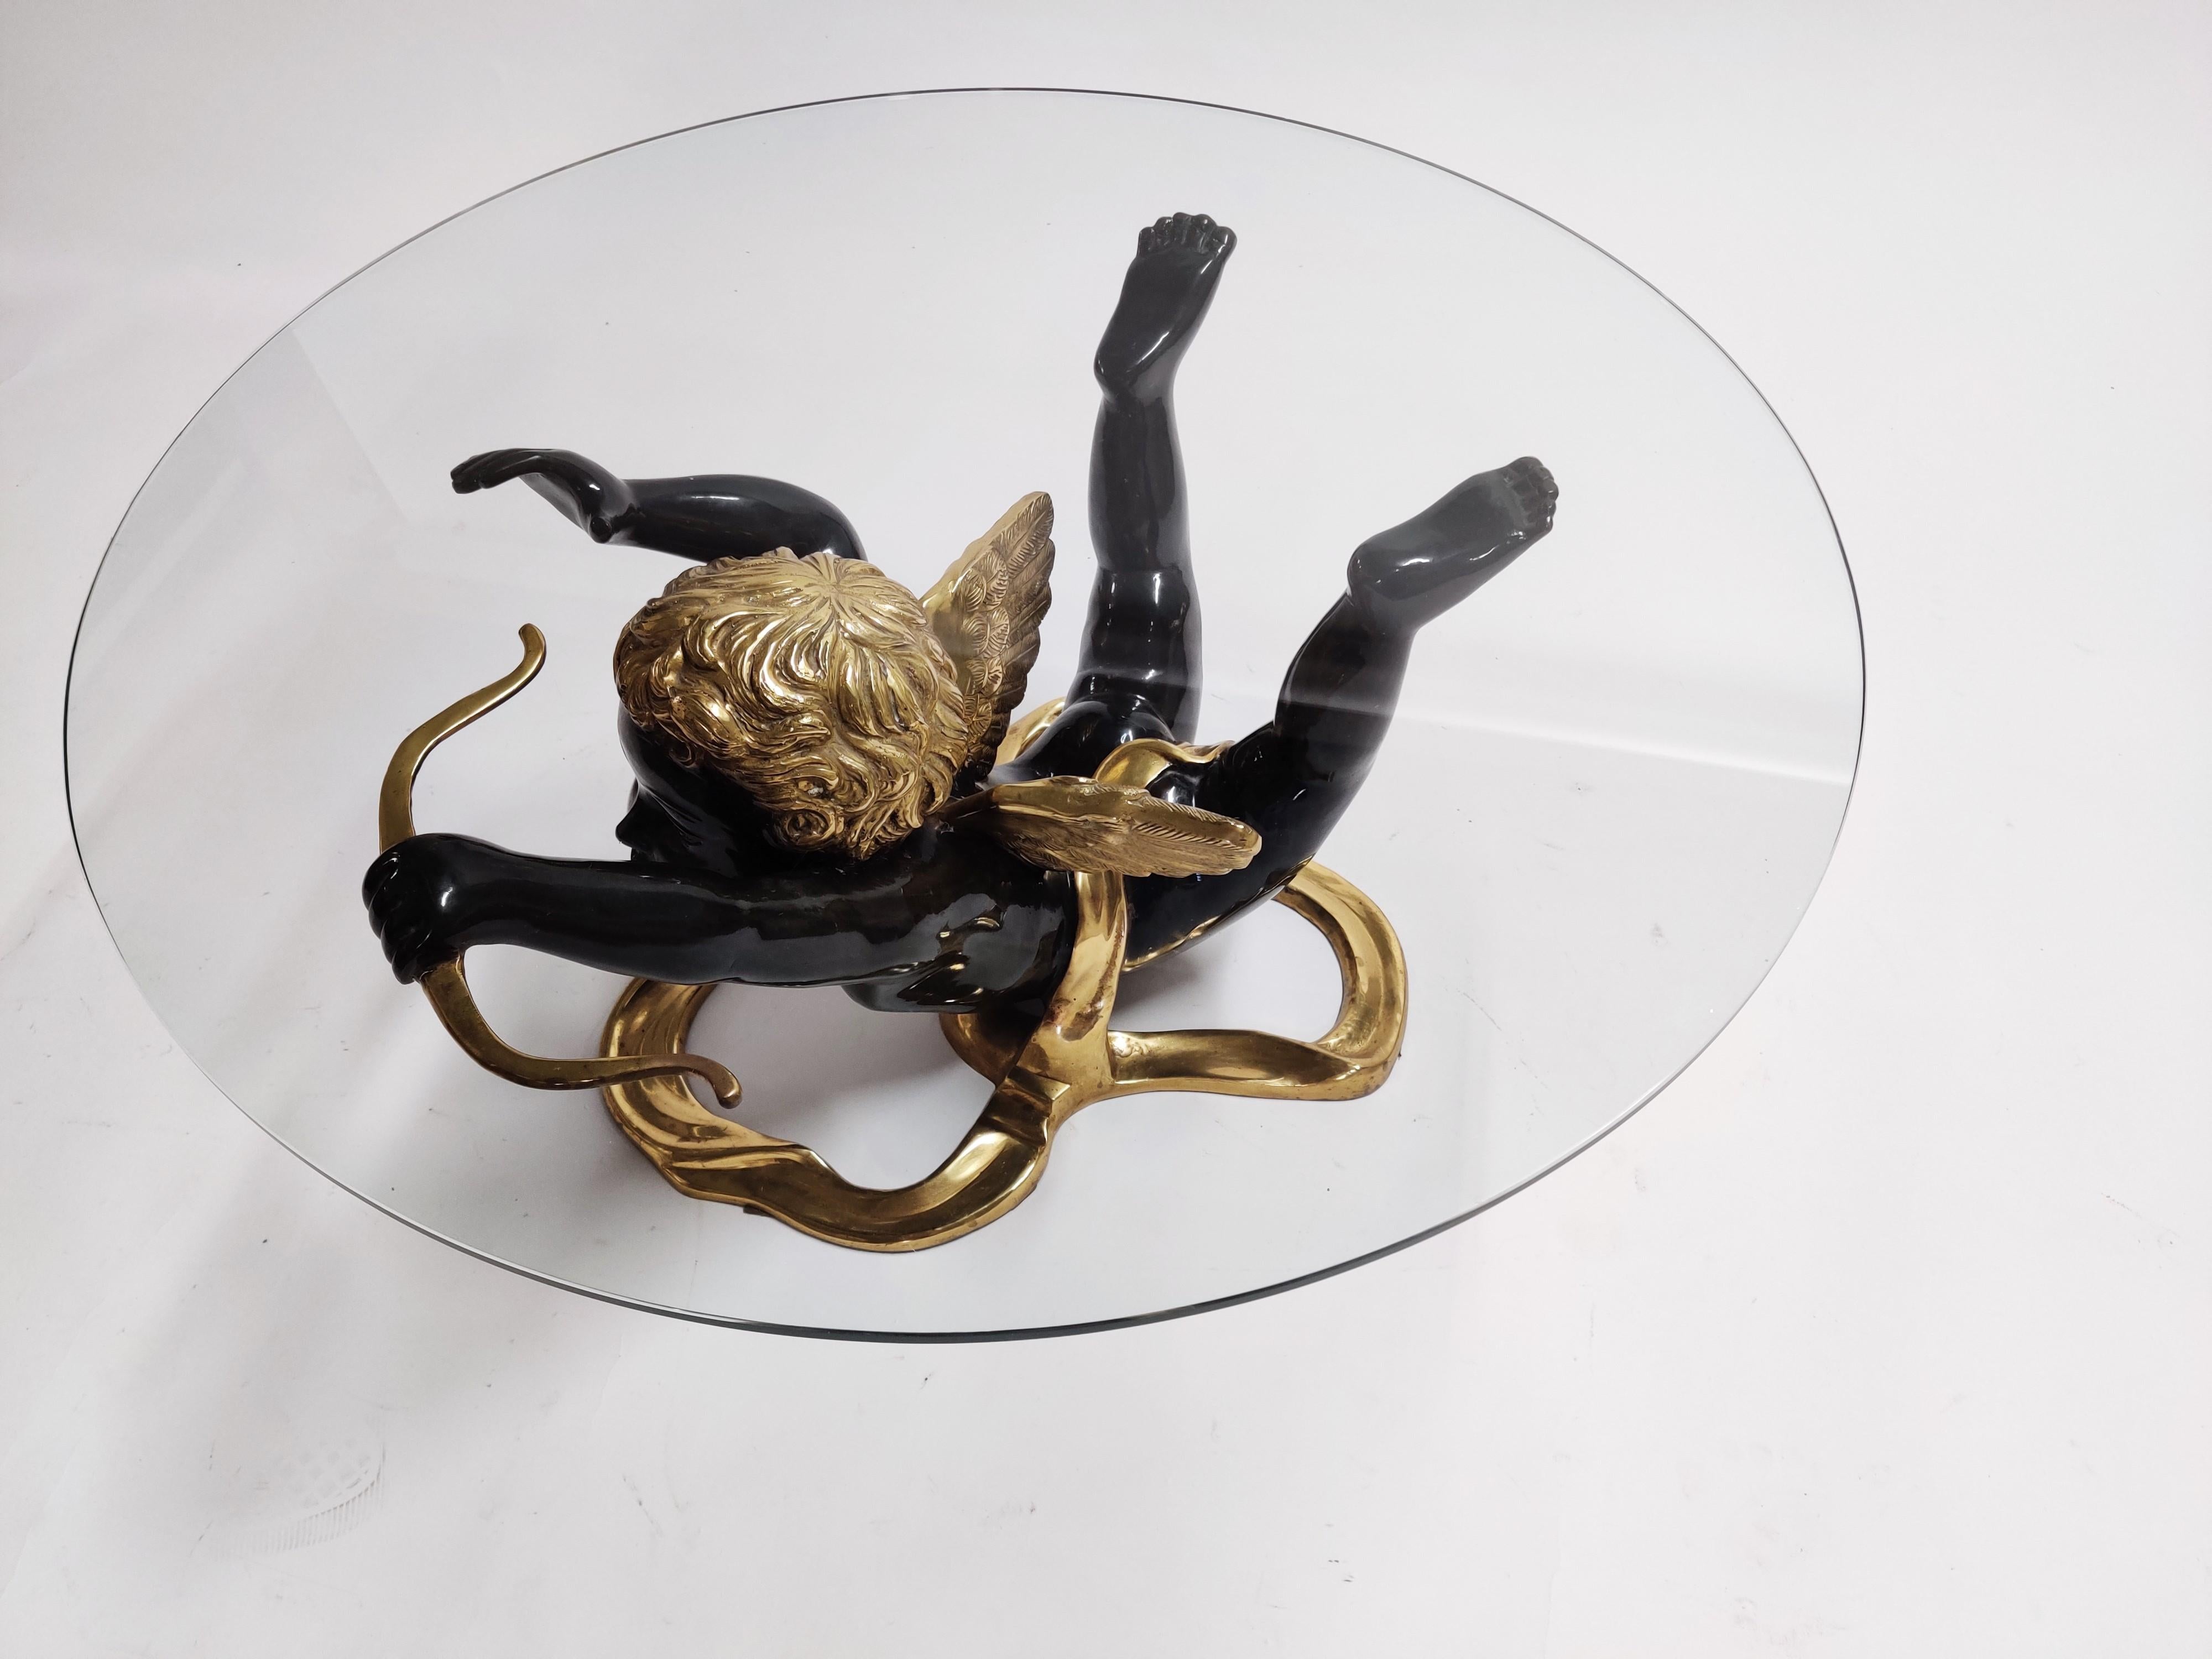 Brass coffee table with a cupid sculpture base.

This beautifully crafted and elegant coffee table comes with a round glass top.

Heavy quality.

1970s, Belgium

Dimensions:
Table:
Diameter 85cm/32.5